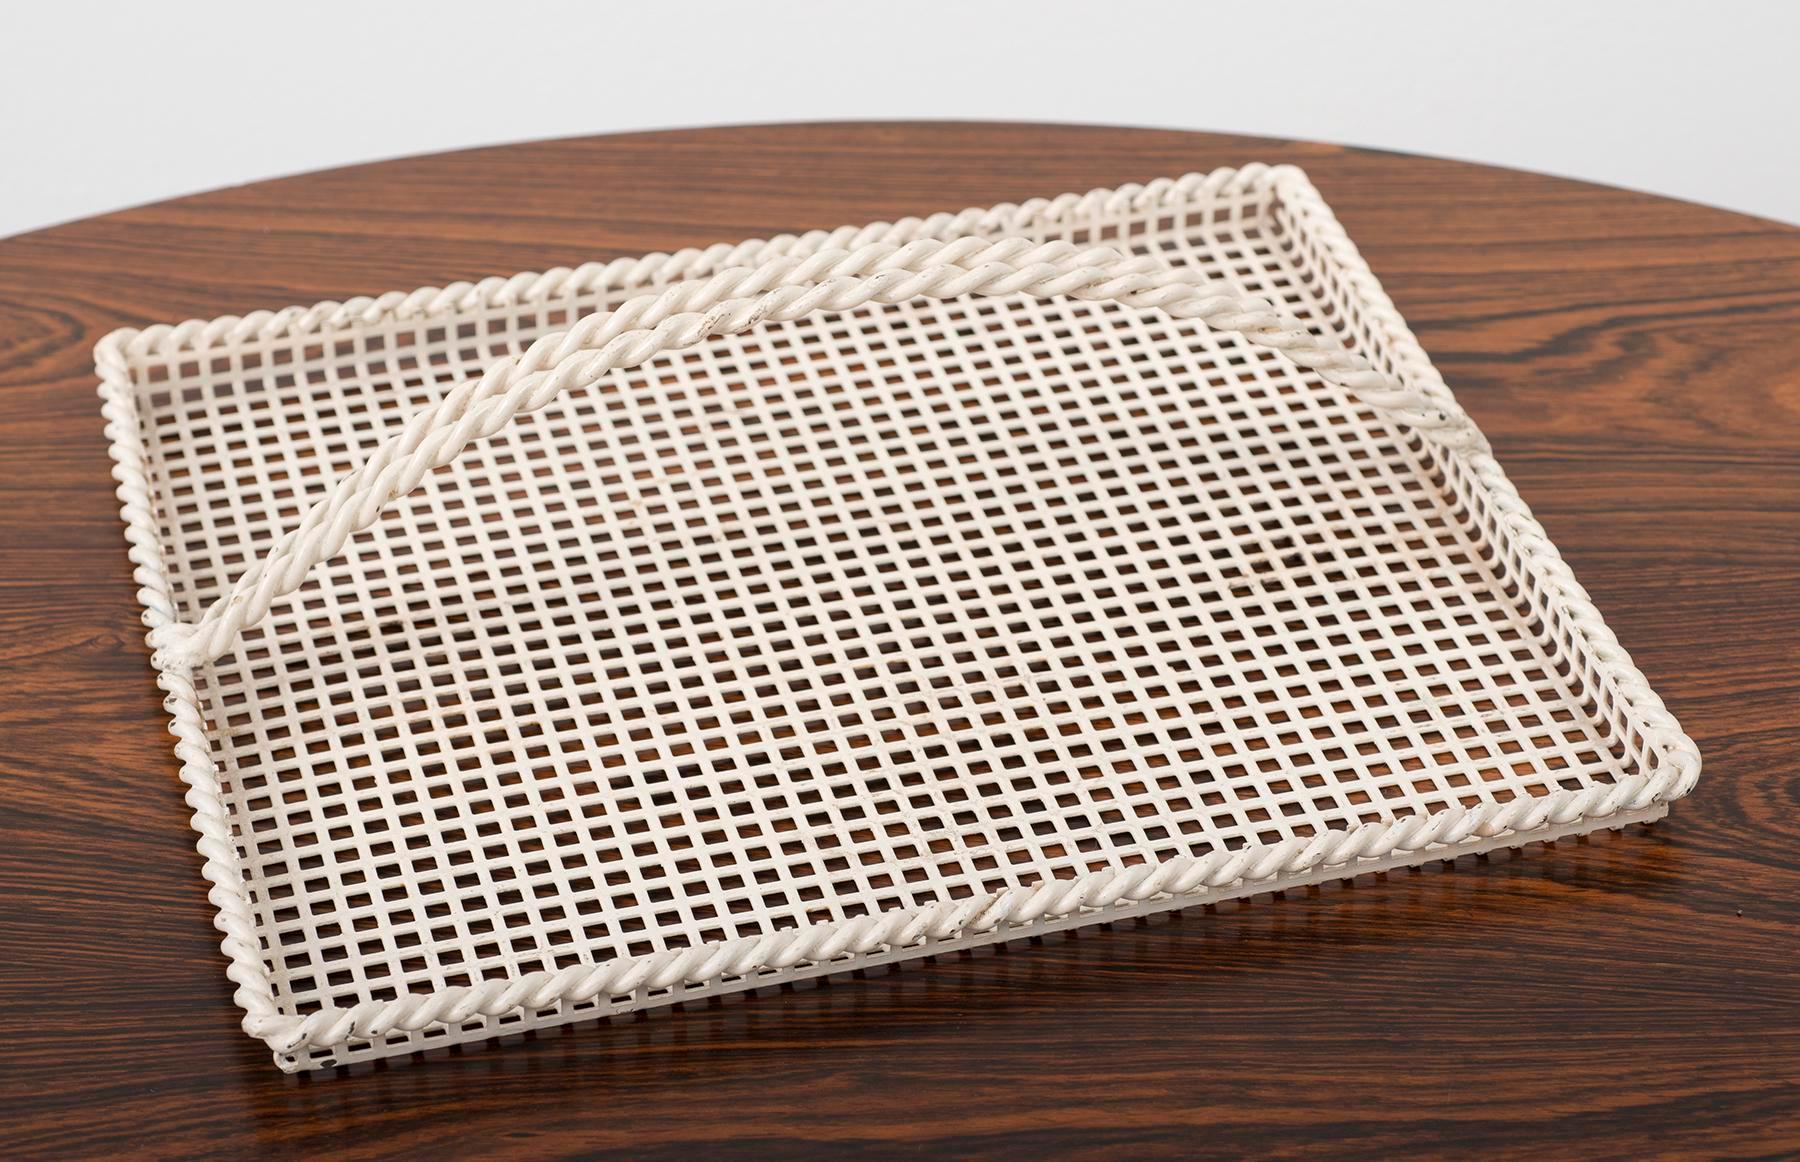 Elegant example of French 1950s metalwork by Mathieu Matégot. Off-white enamel finish in excellent vintage condition. Perforated metal in square grid pattern with twisted border and handle.